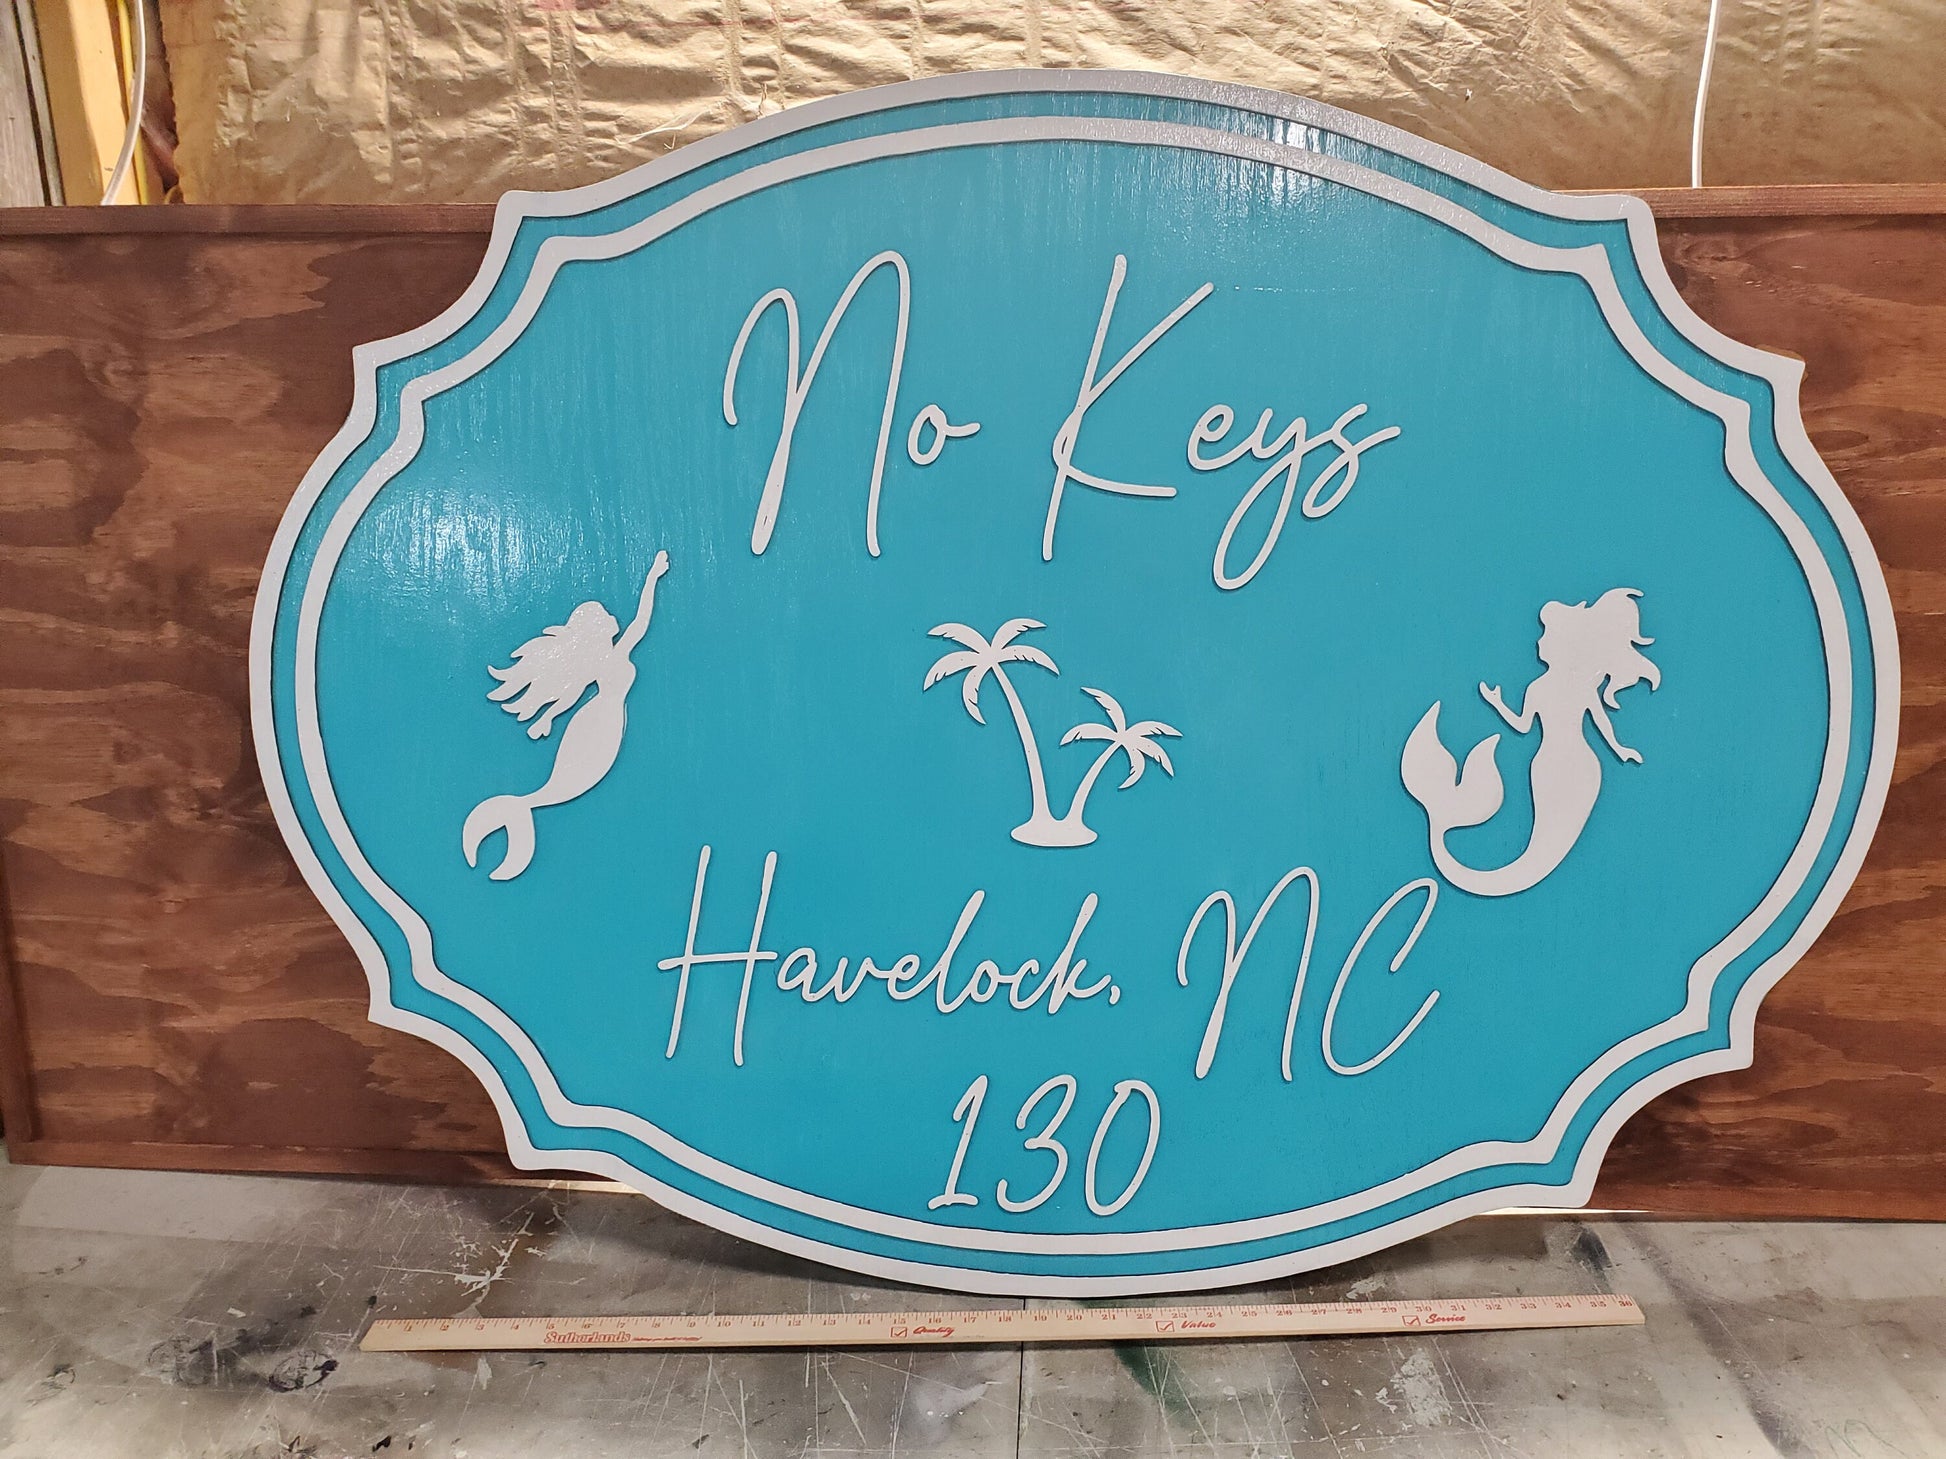 Large Beach House Sign Mermaid Bay Ocean Address Established Sign Exterior Outdoor 3D Raised Text Teal White Shabby Chic Nautical